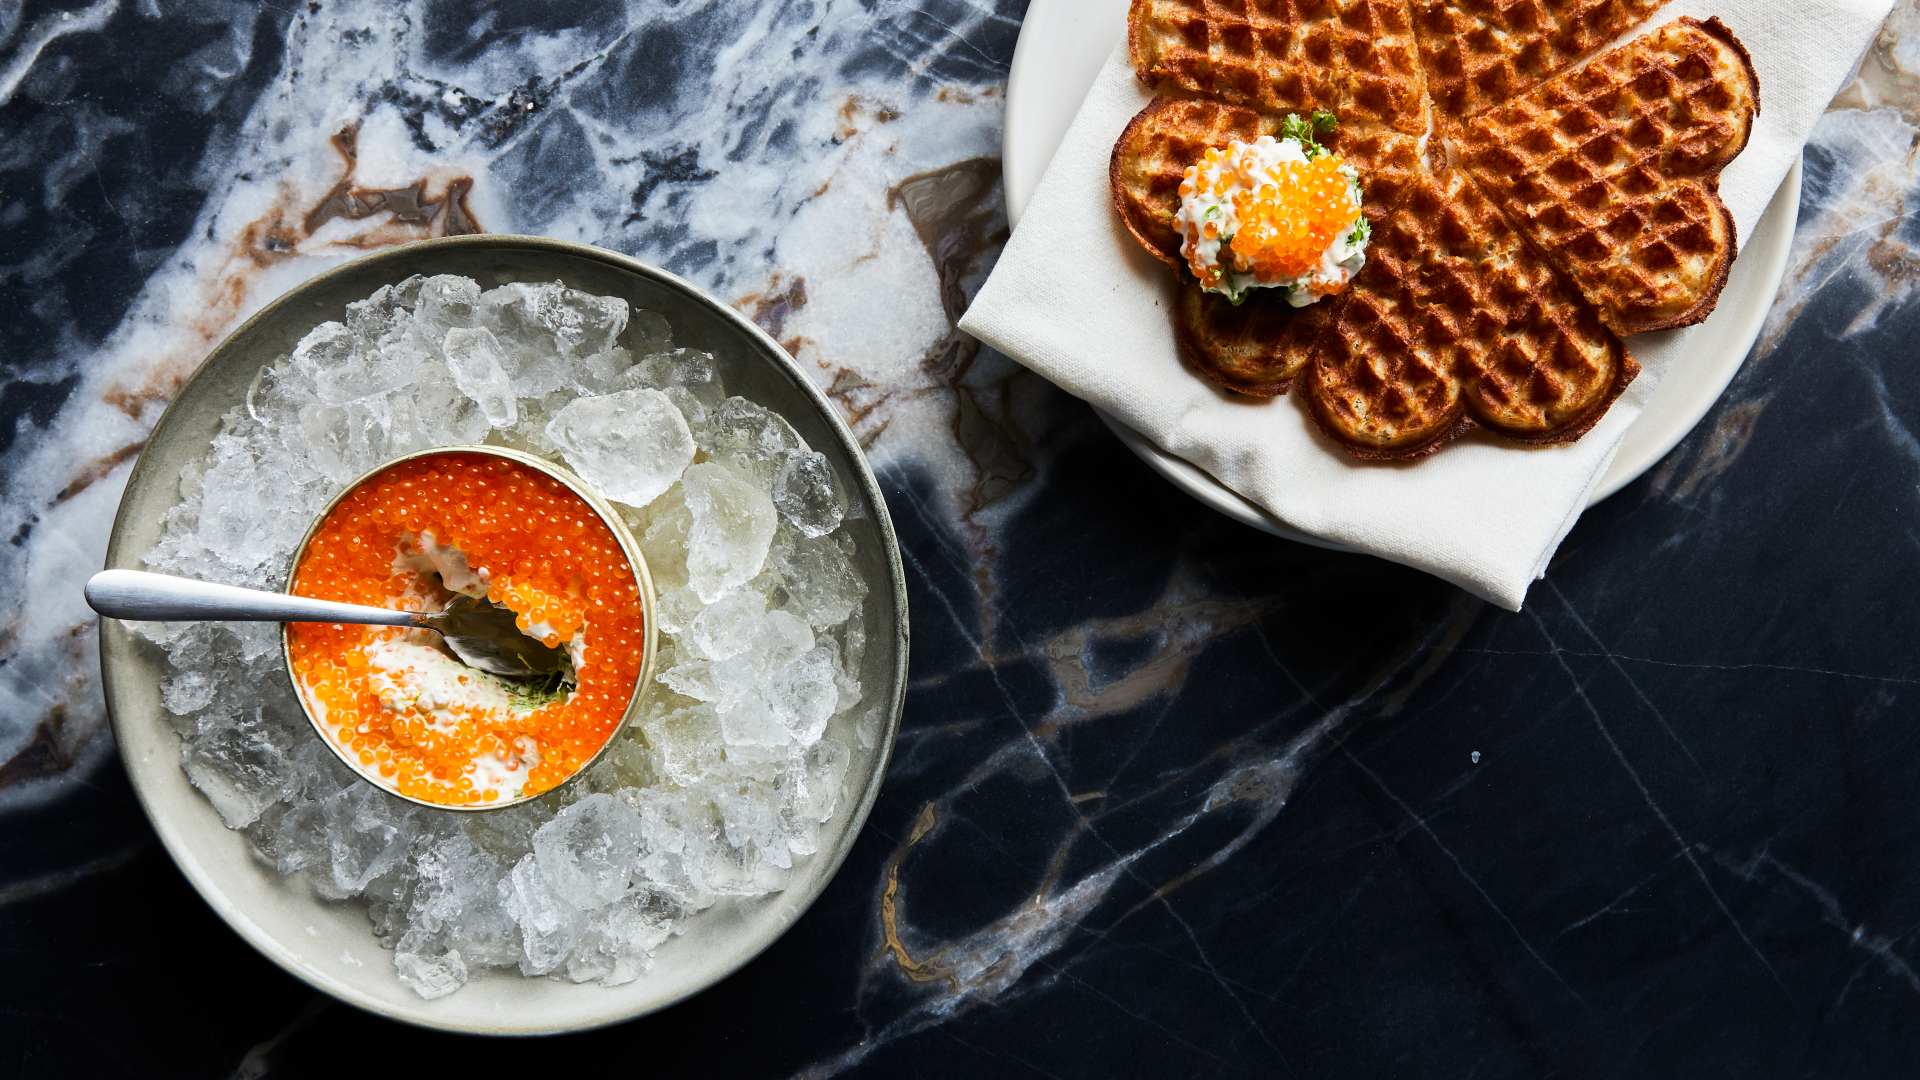 Now Open: Freyja Is Melbourne's Sophisticated 'New Nordic' Restaurant With Michelin Cred